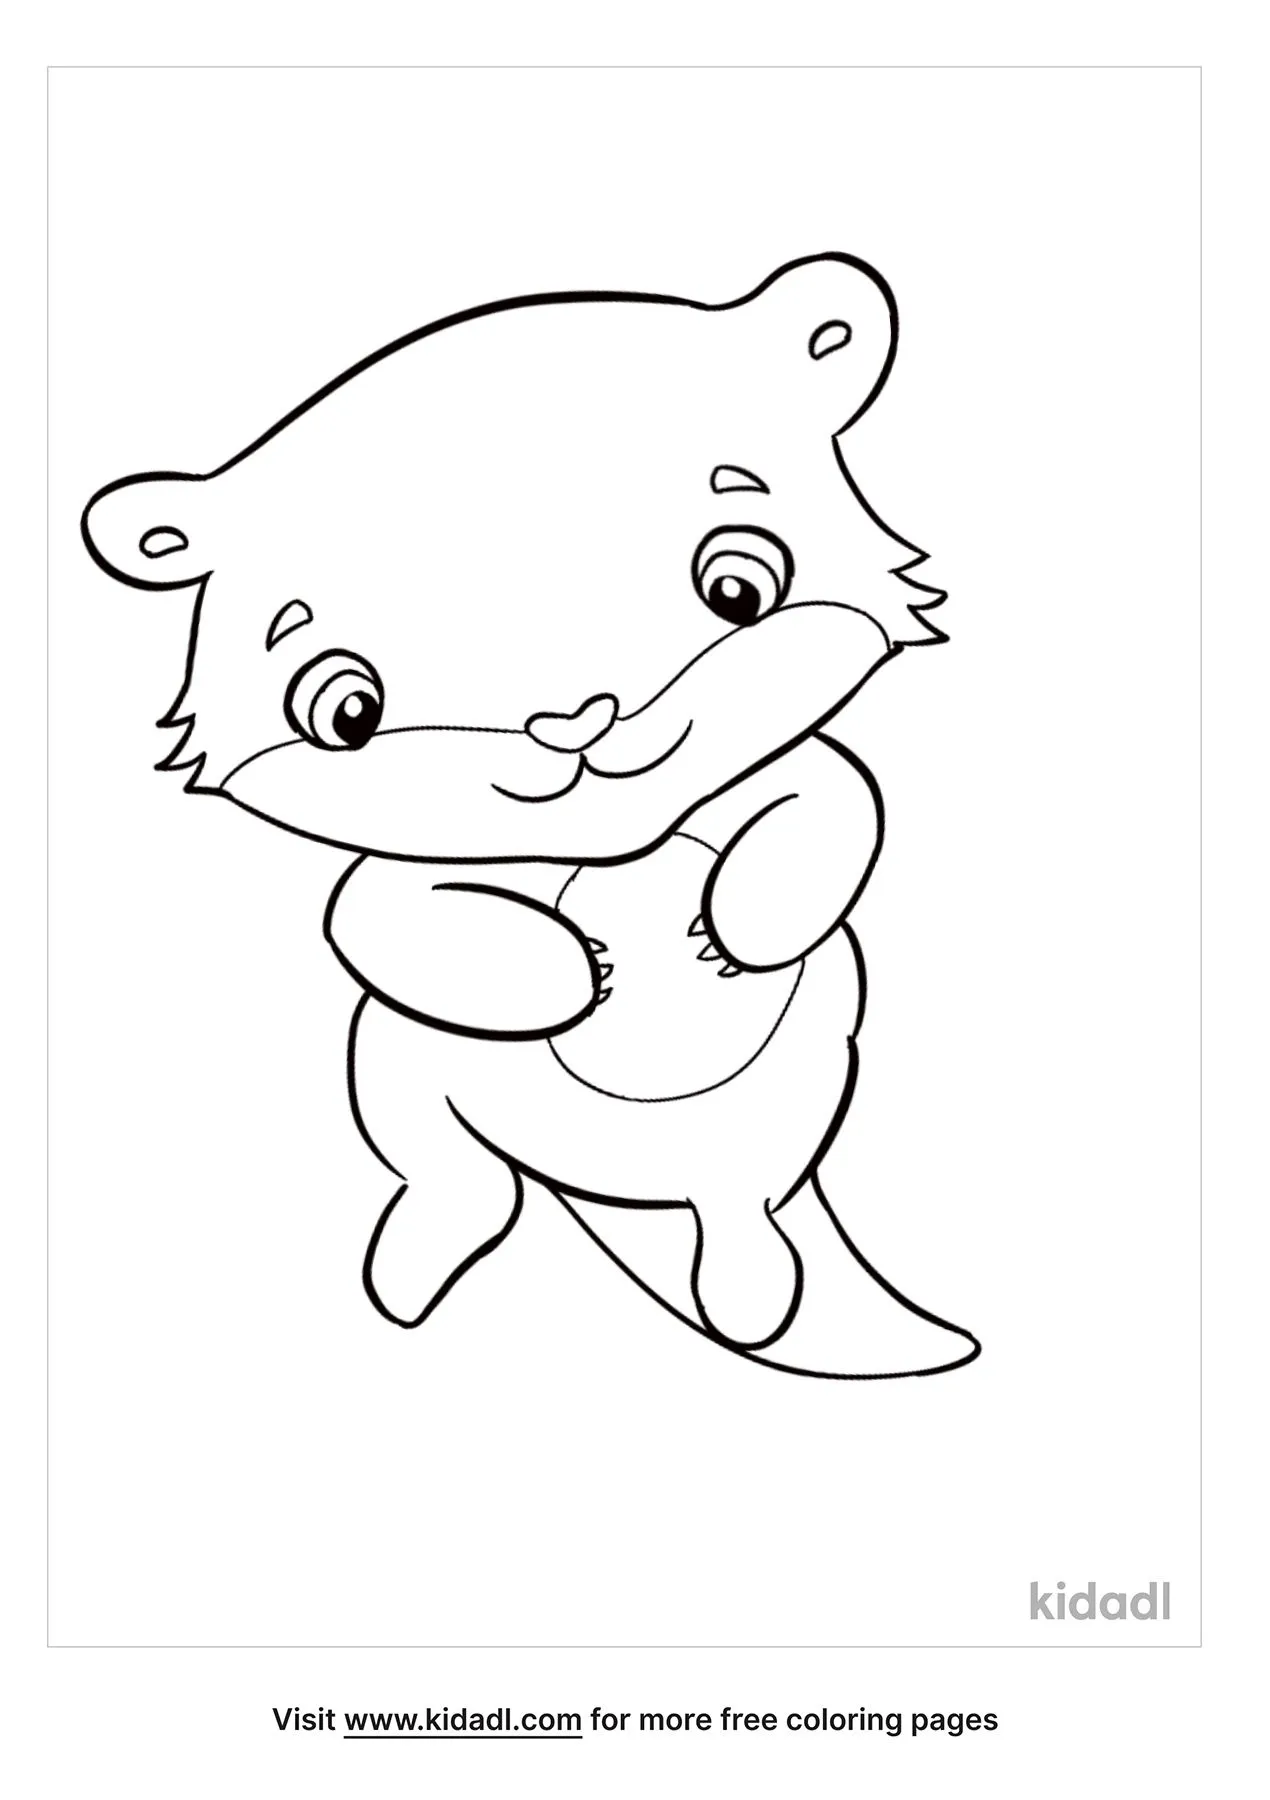 Free Cute Cartoon Baby Sea Otter Coloring Page | Coloring Page Printables |  Kidadl